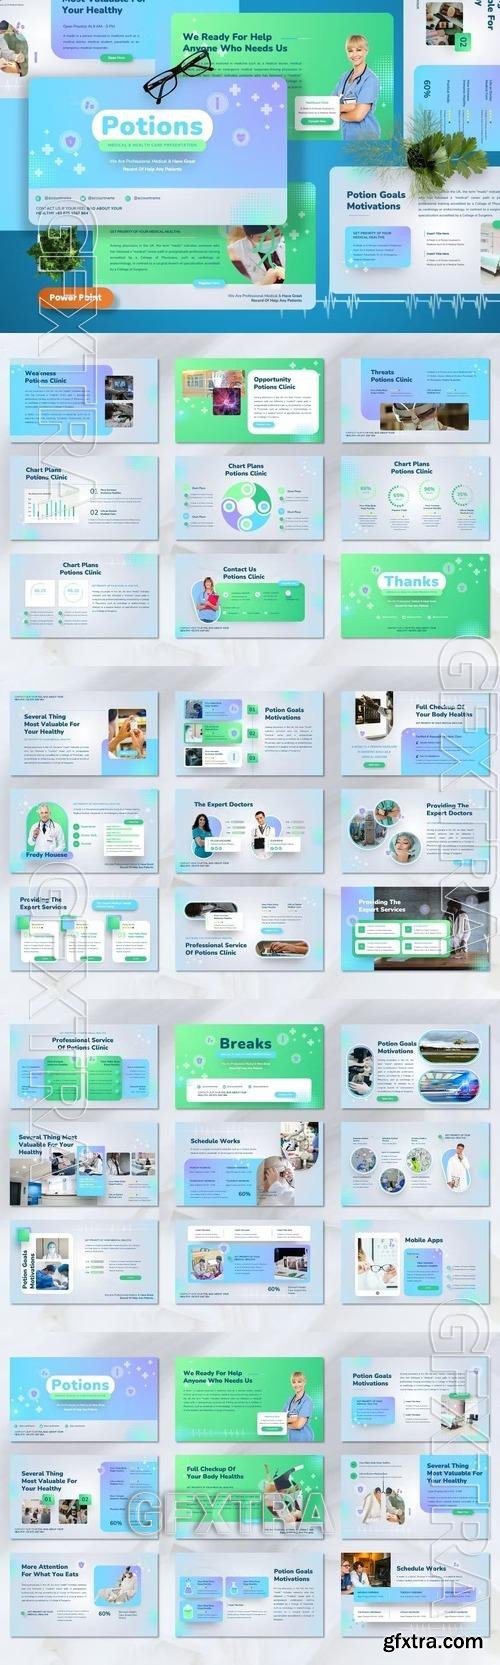 Potions - Medical & Healthcare Powerpoint Template LK568FU